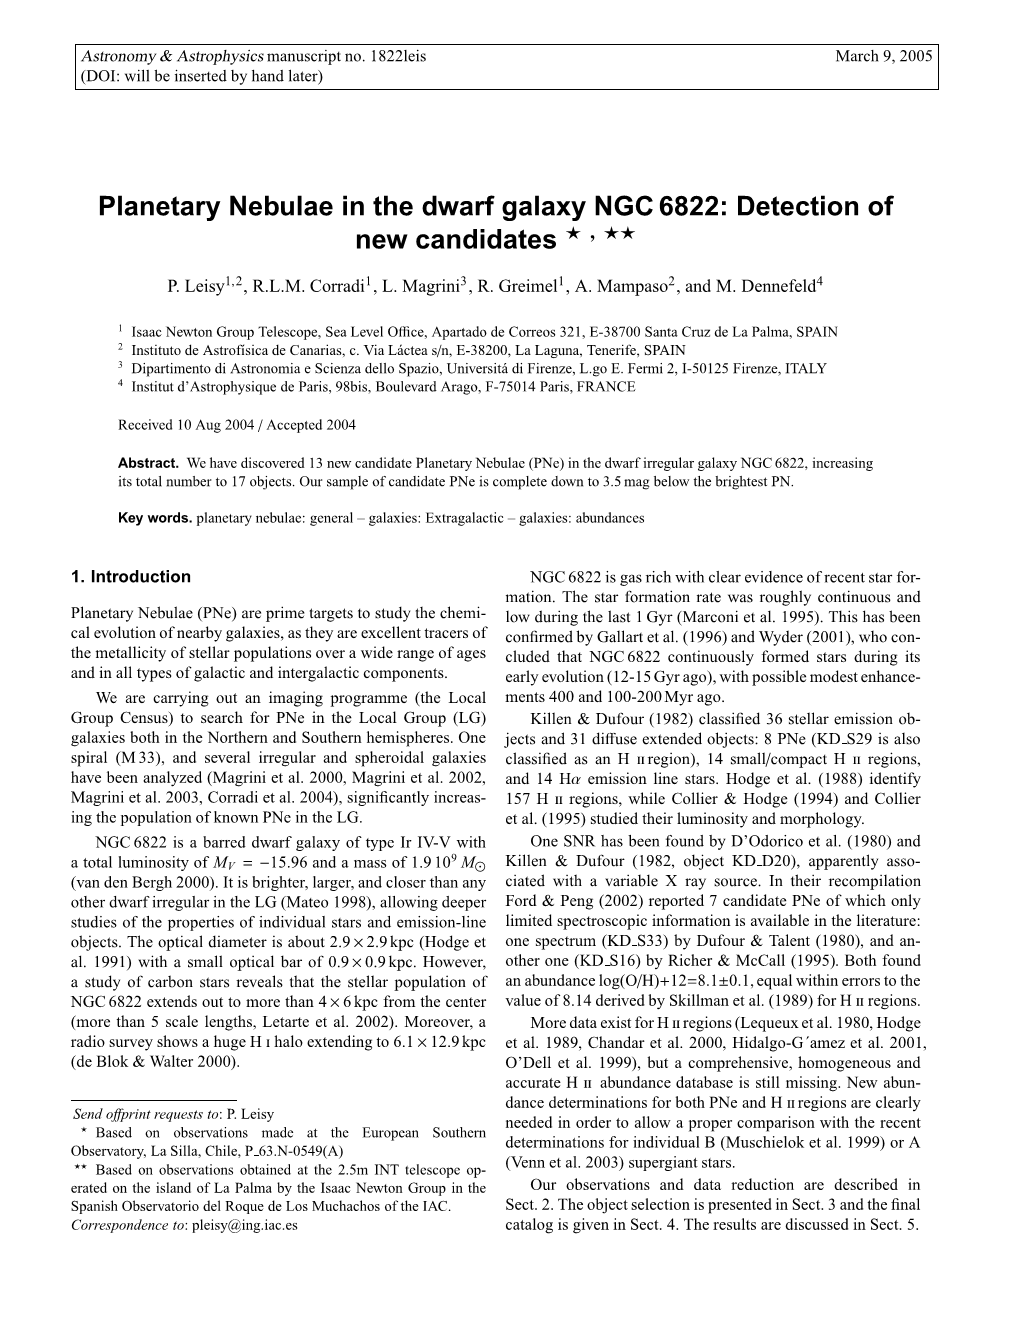 Planetary Nebulae in the Dwarf Galaxy NGC 6822: Detection of New Candidates ? , ??